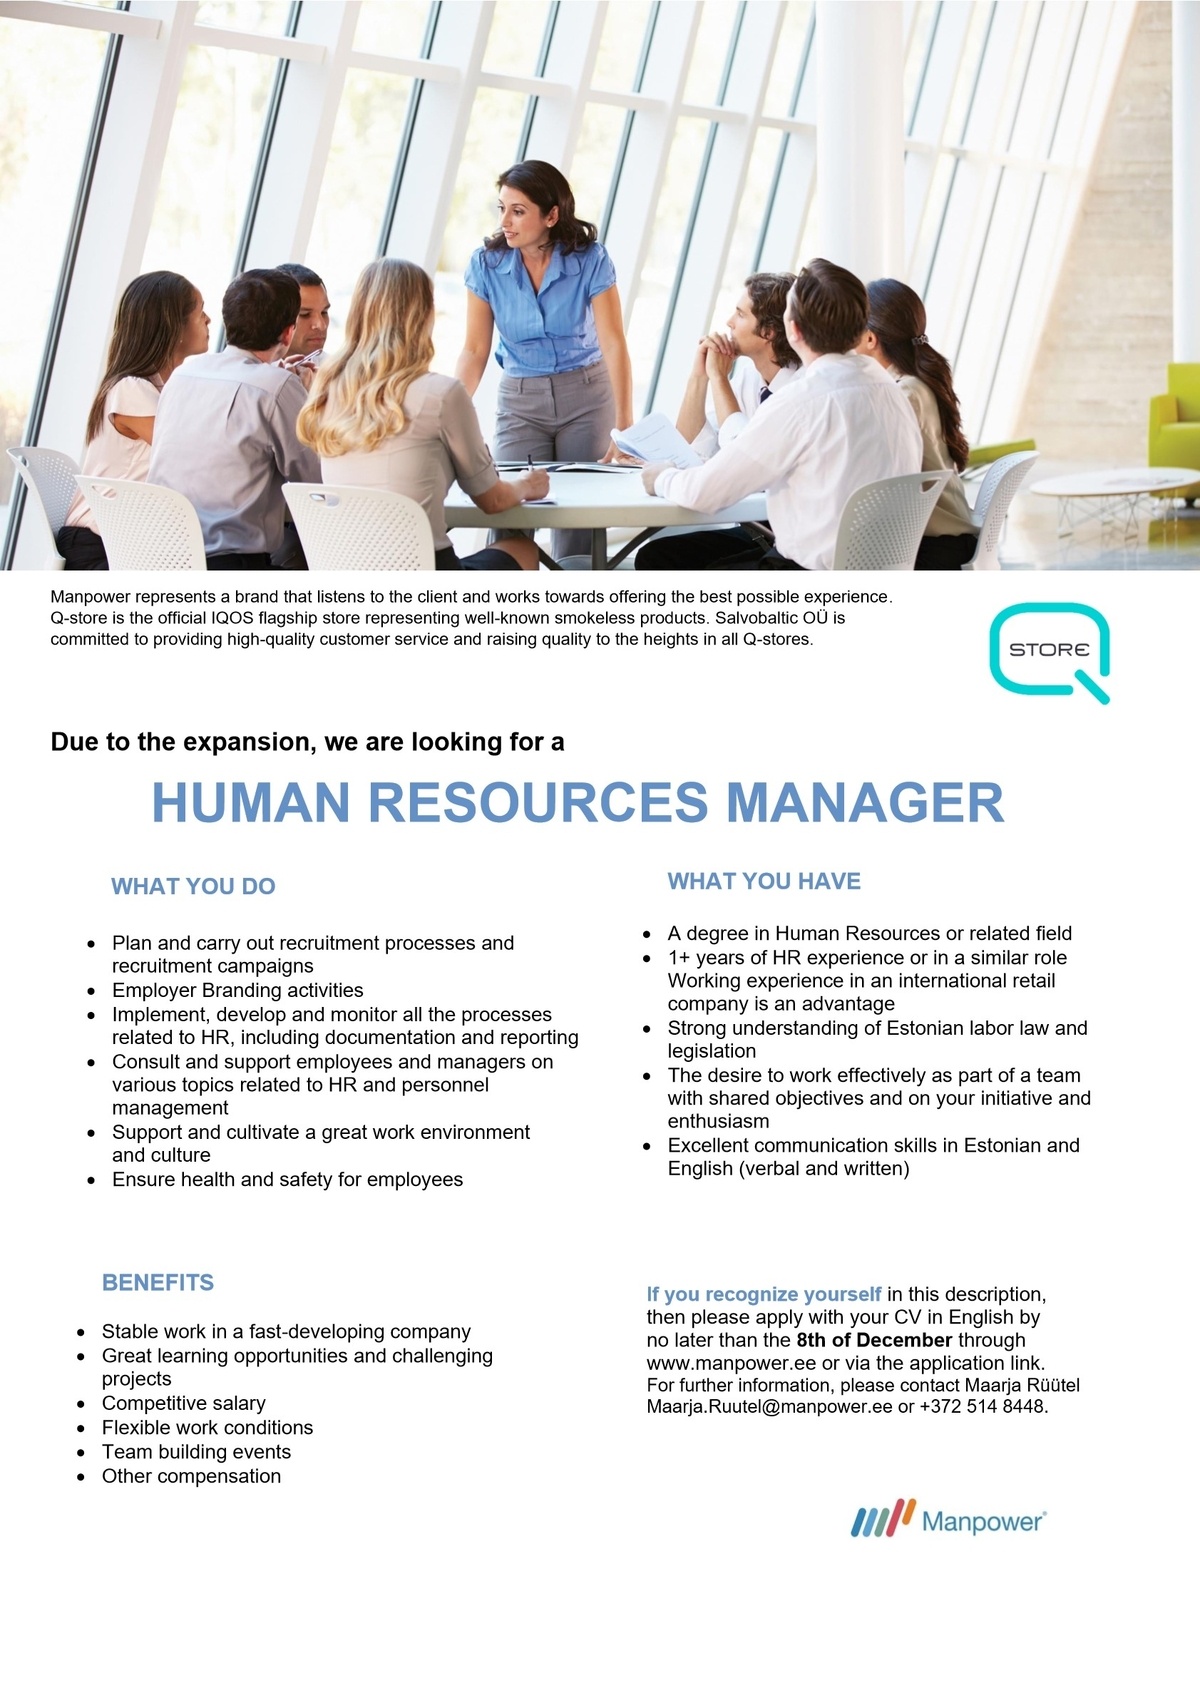 Manpower OÜ HUMAN RESOURCES MANAGER